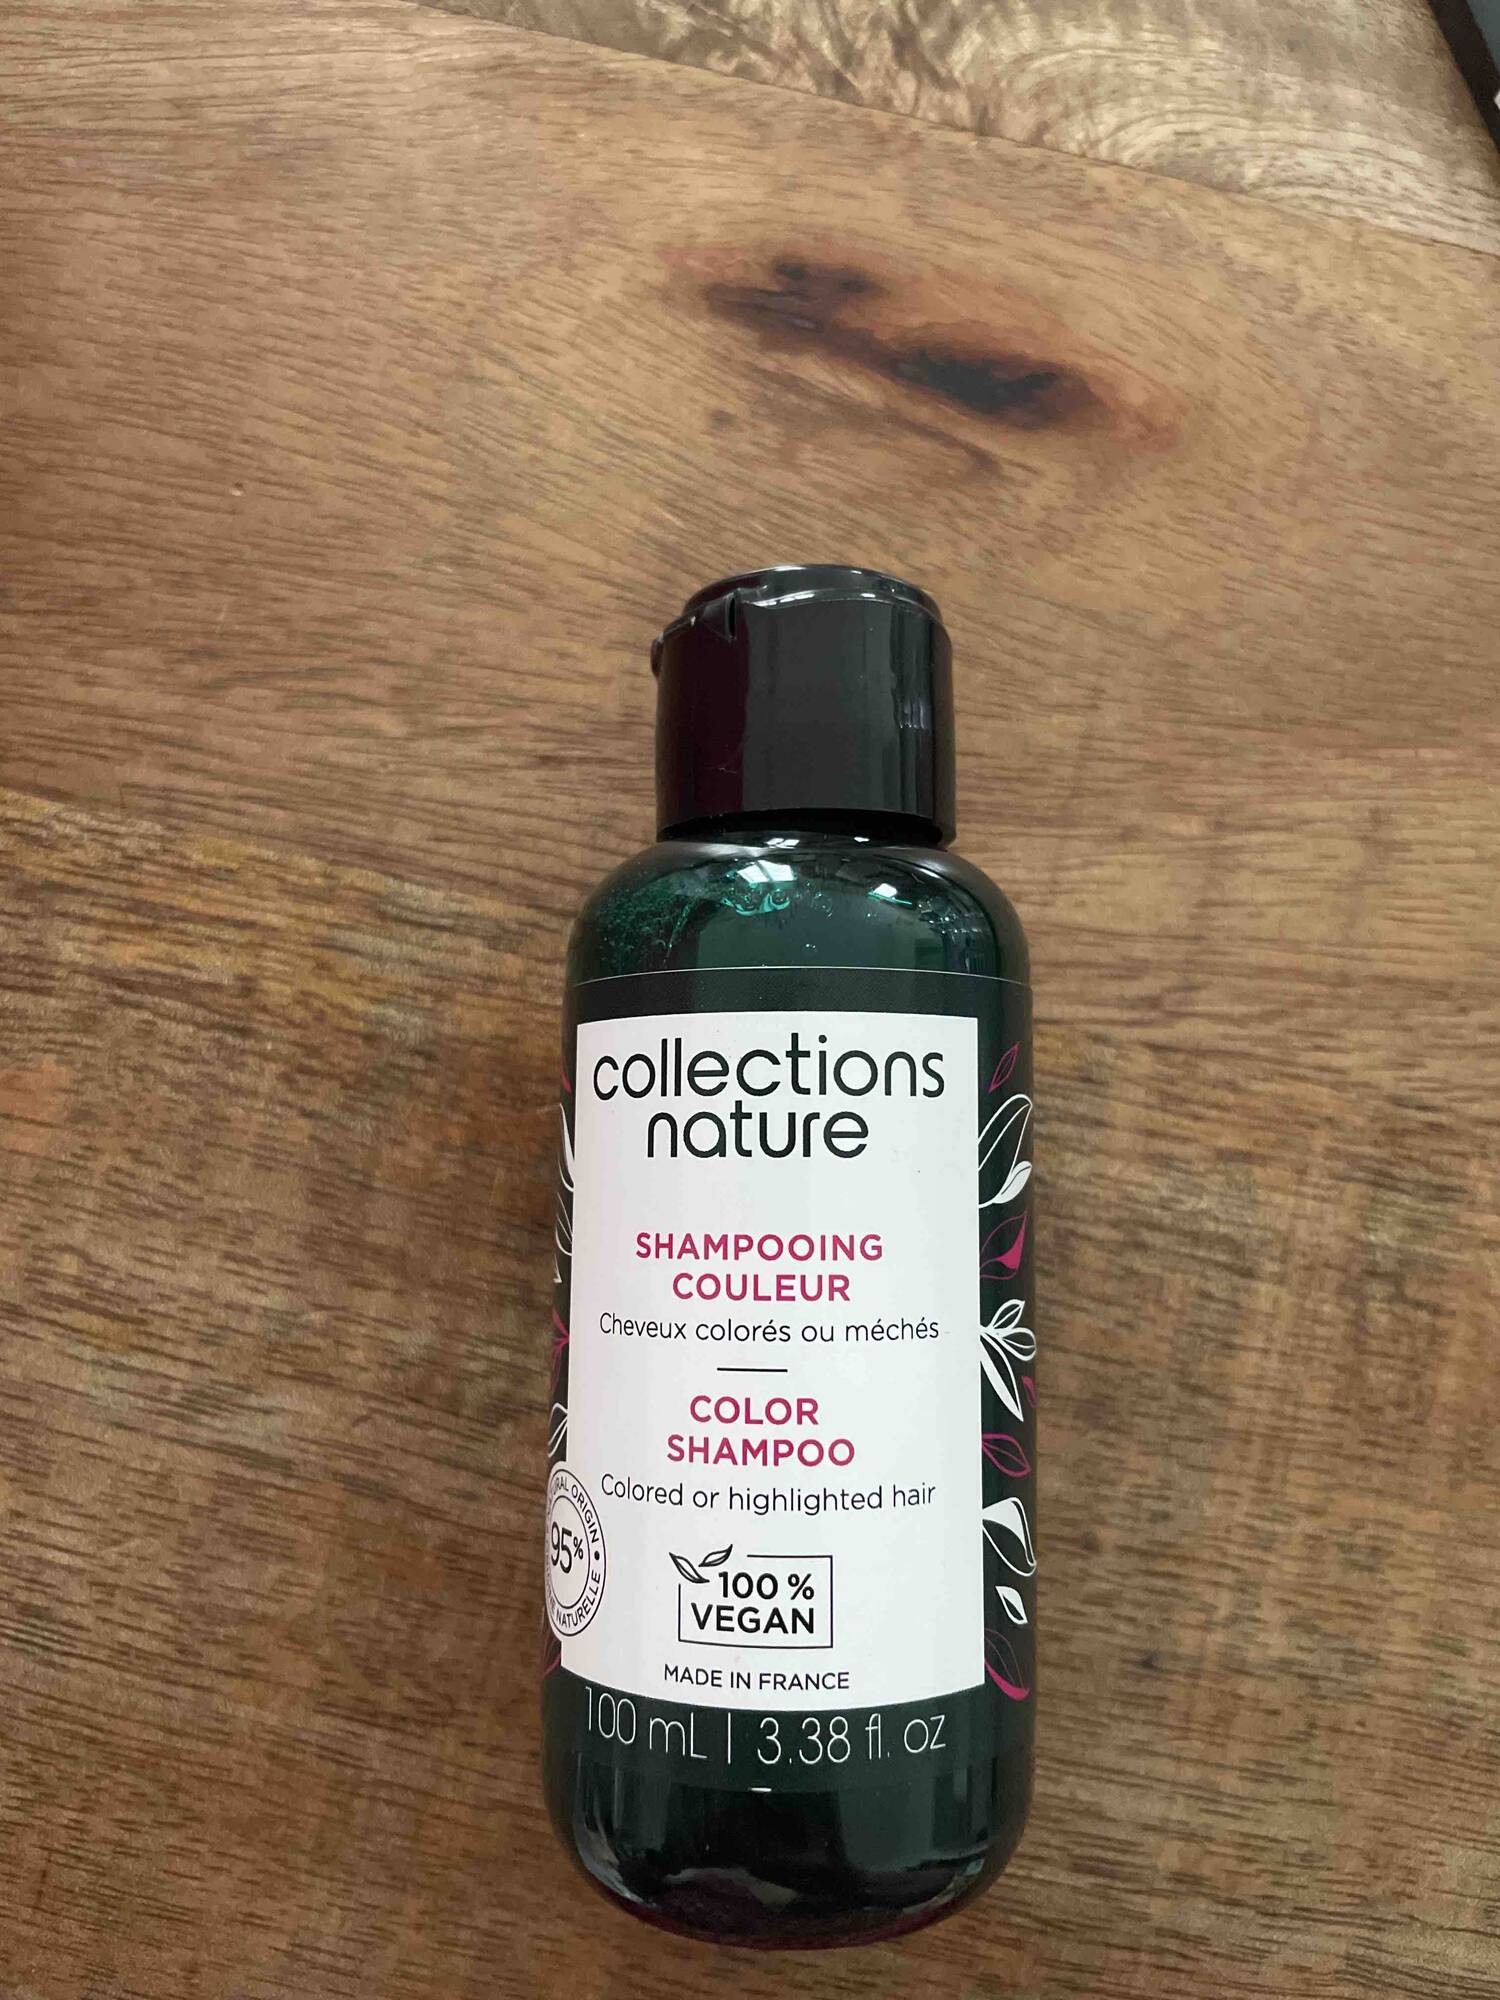 EUGÈNE PERMA - Collections nature - Shampooing couleur